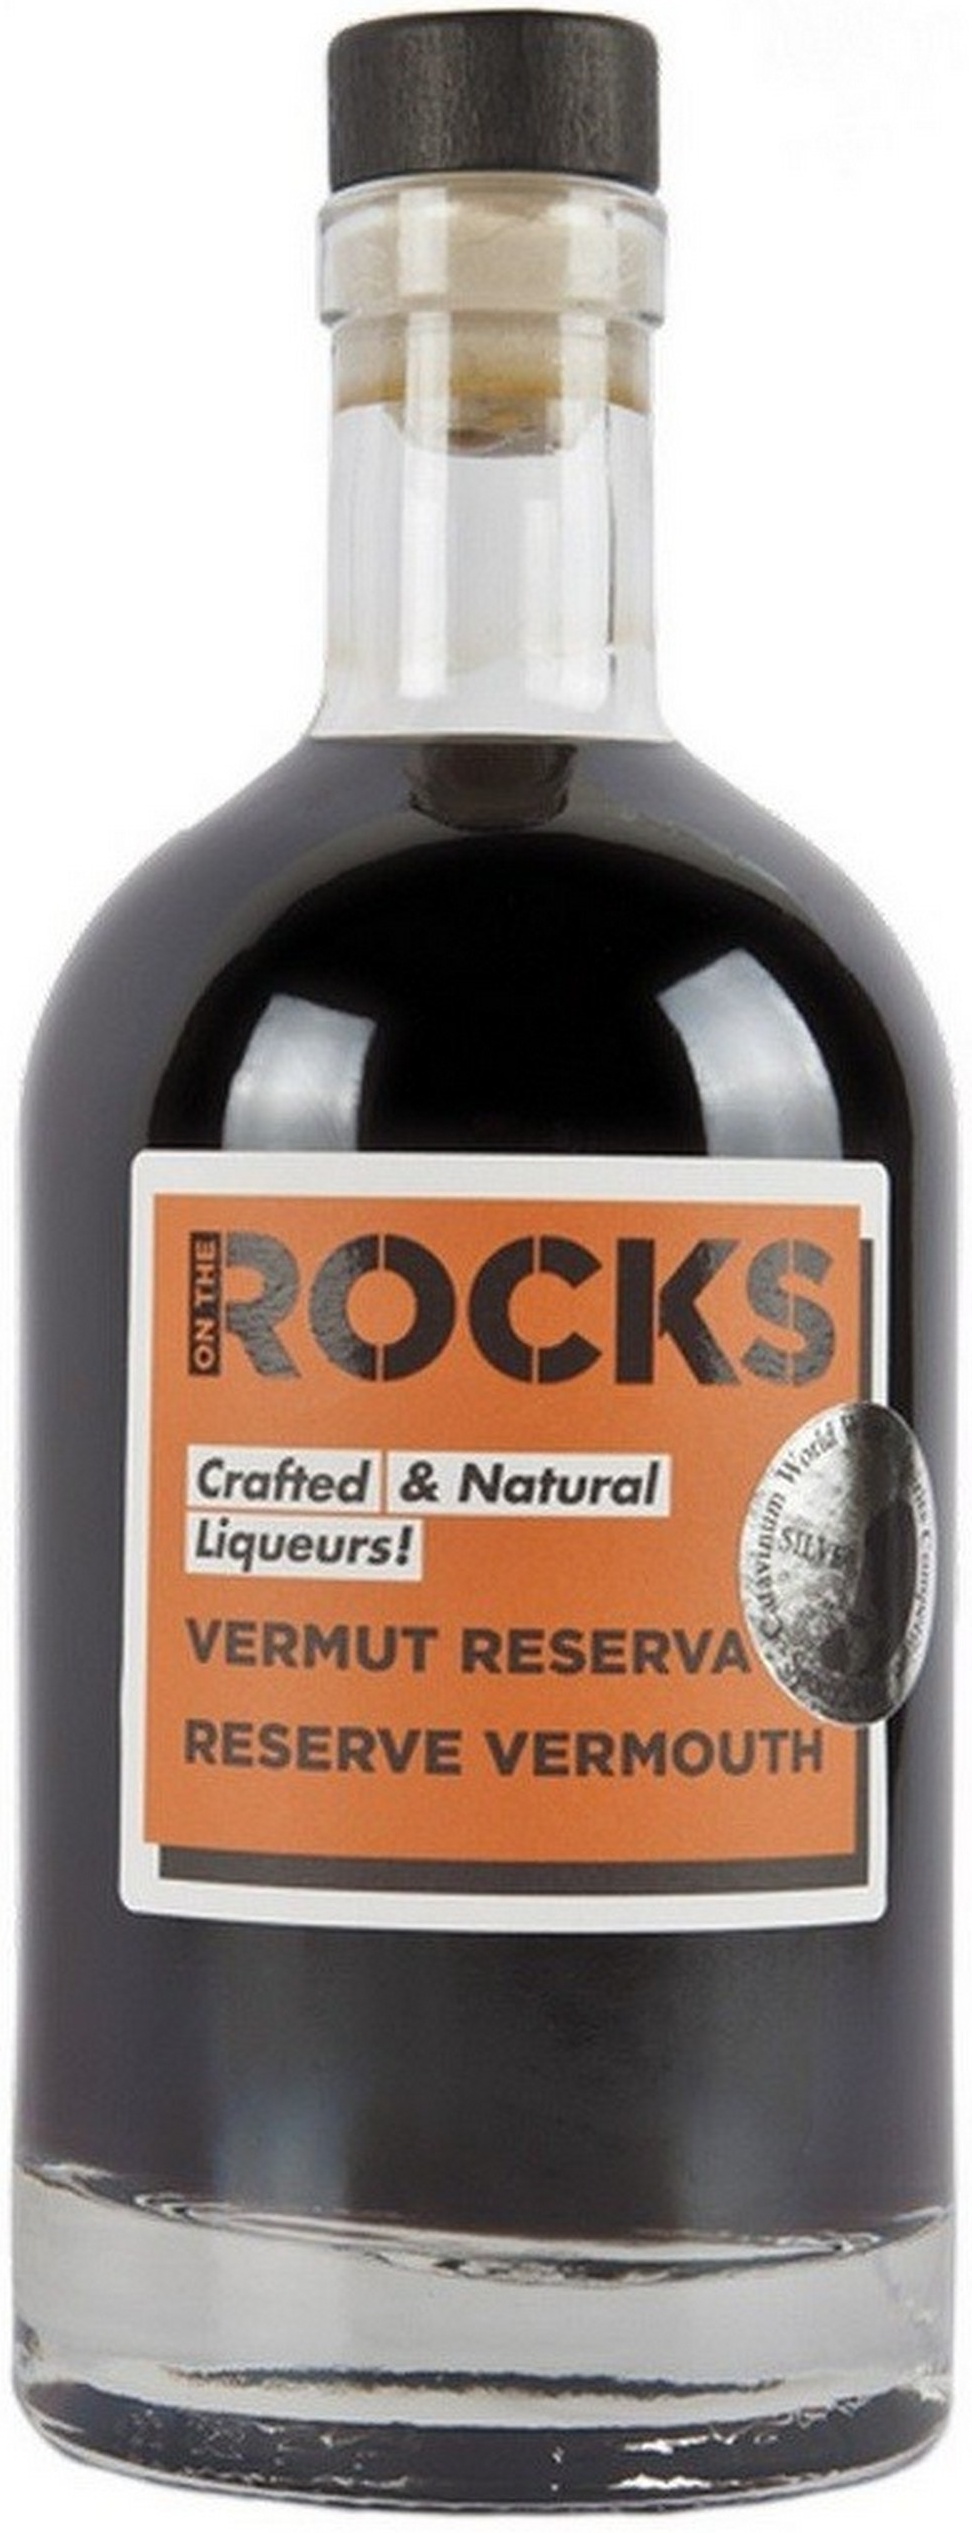 on-the-rocks-vermouth-reserva-